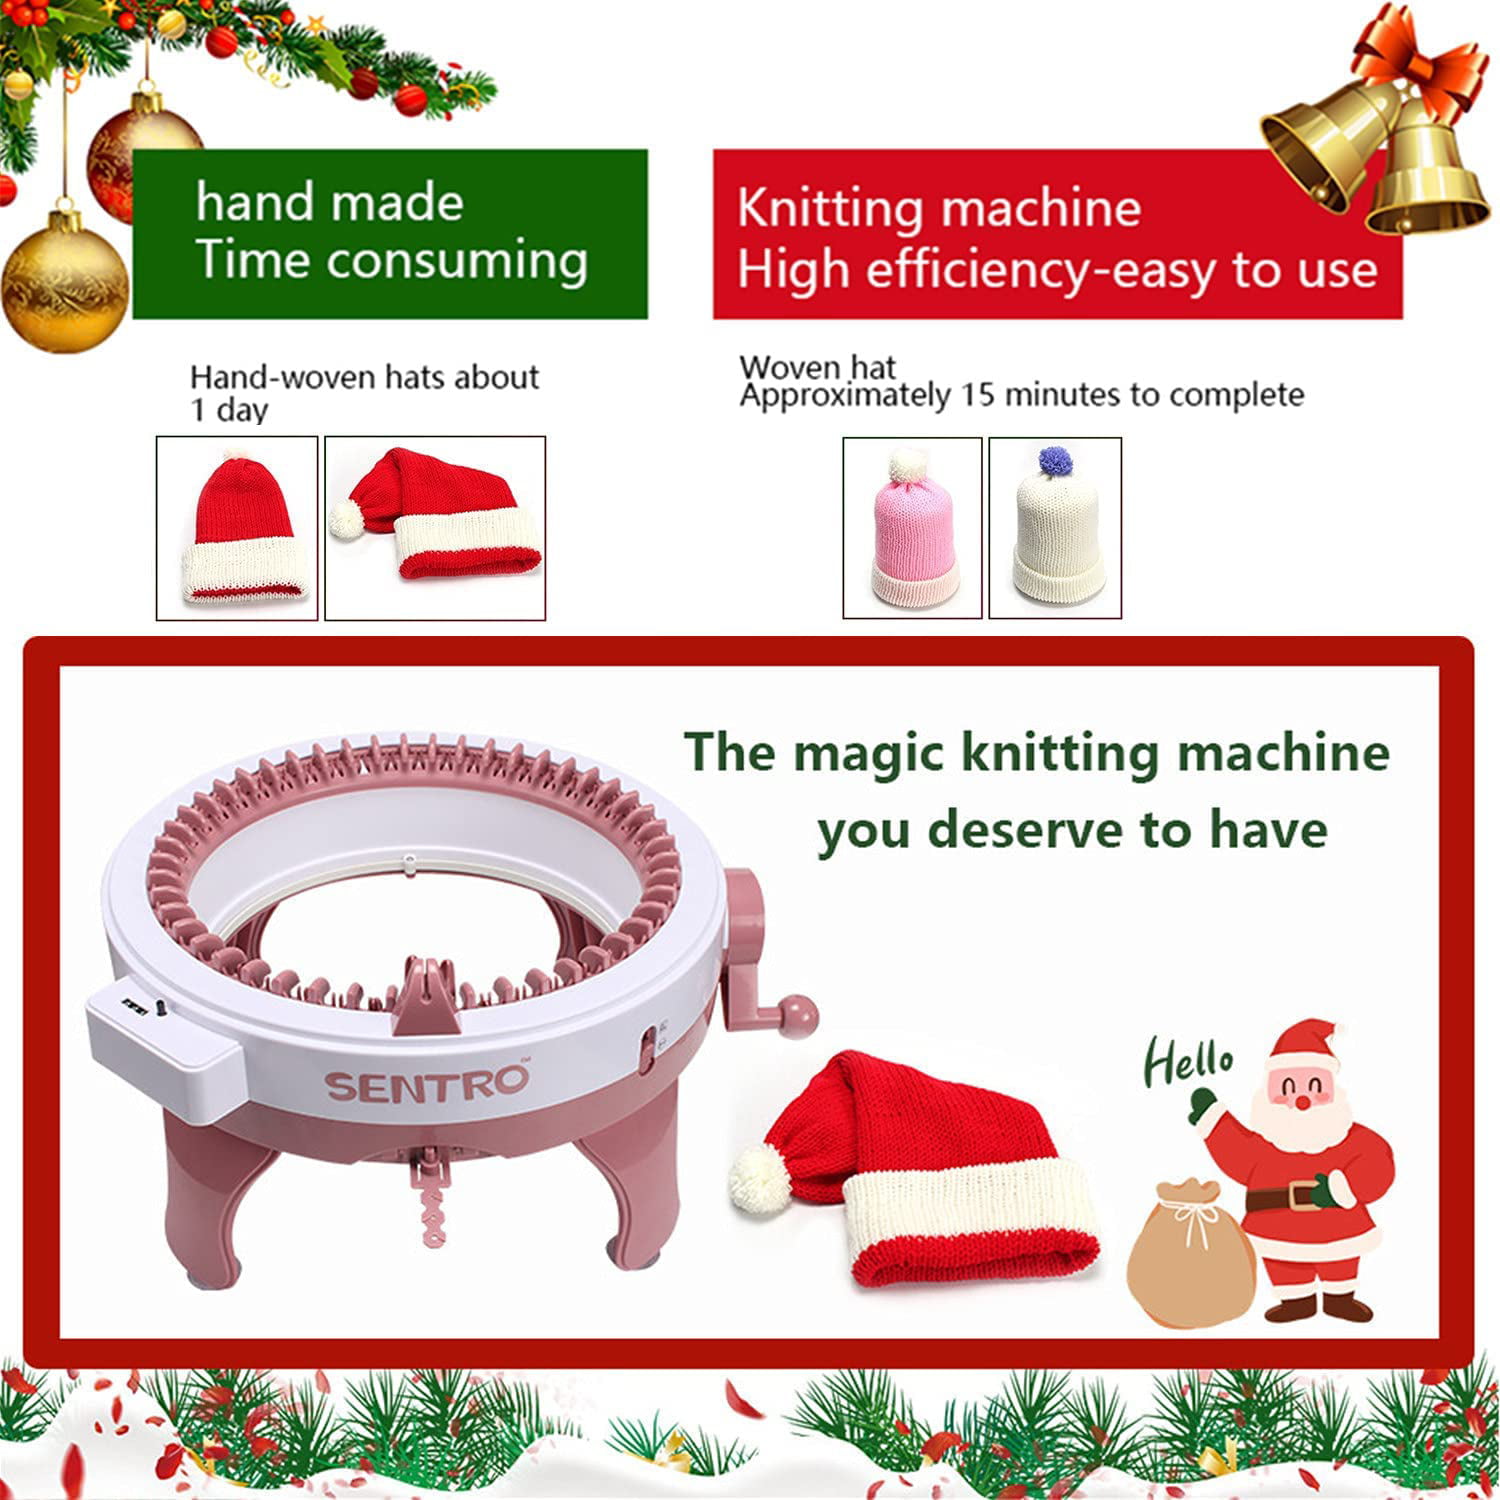 knitting machines/knitting machine 22 needles/smart loom-knitting loom DIY  hand knitting machine-suitable for beginners and knitting enthusiasts/22